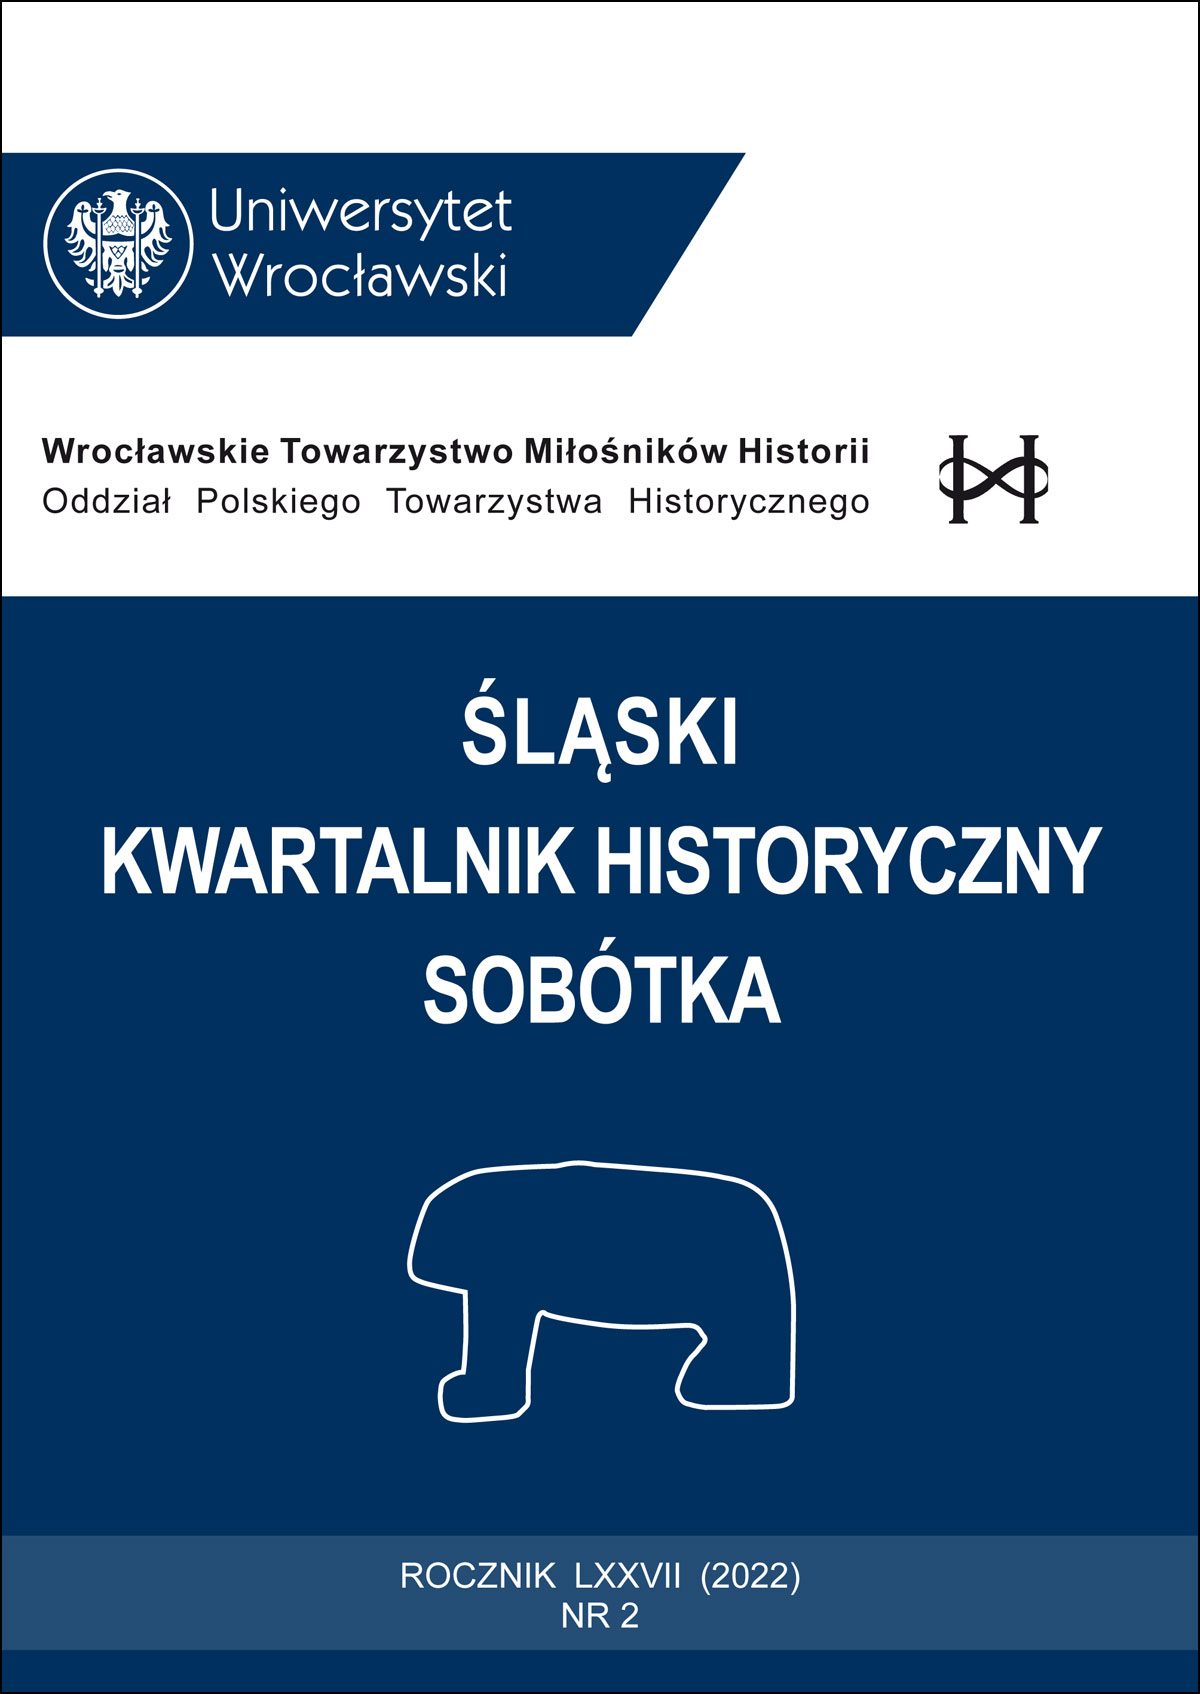 The latest publications on history of Silesia Cover Image